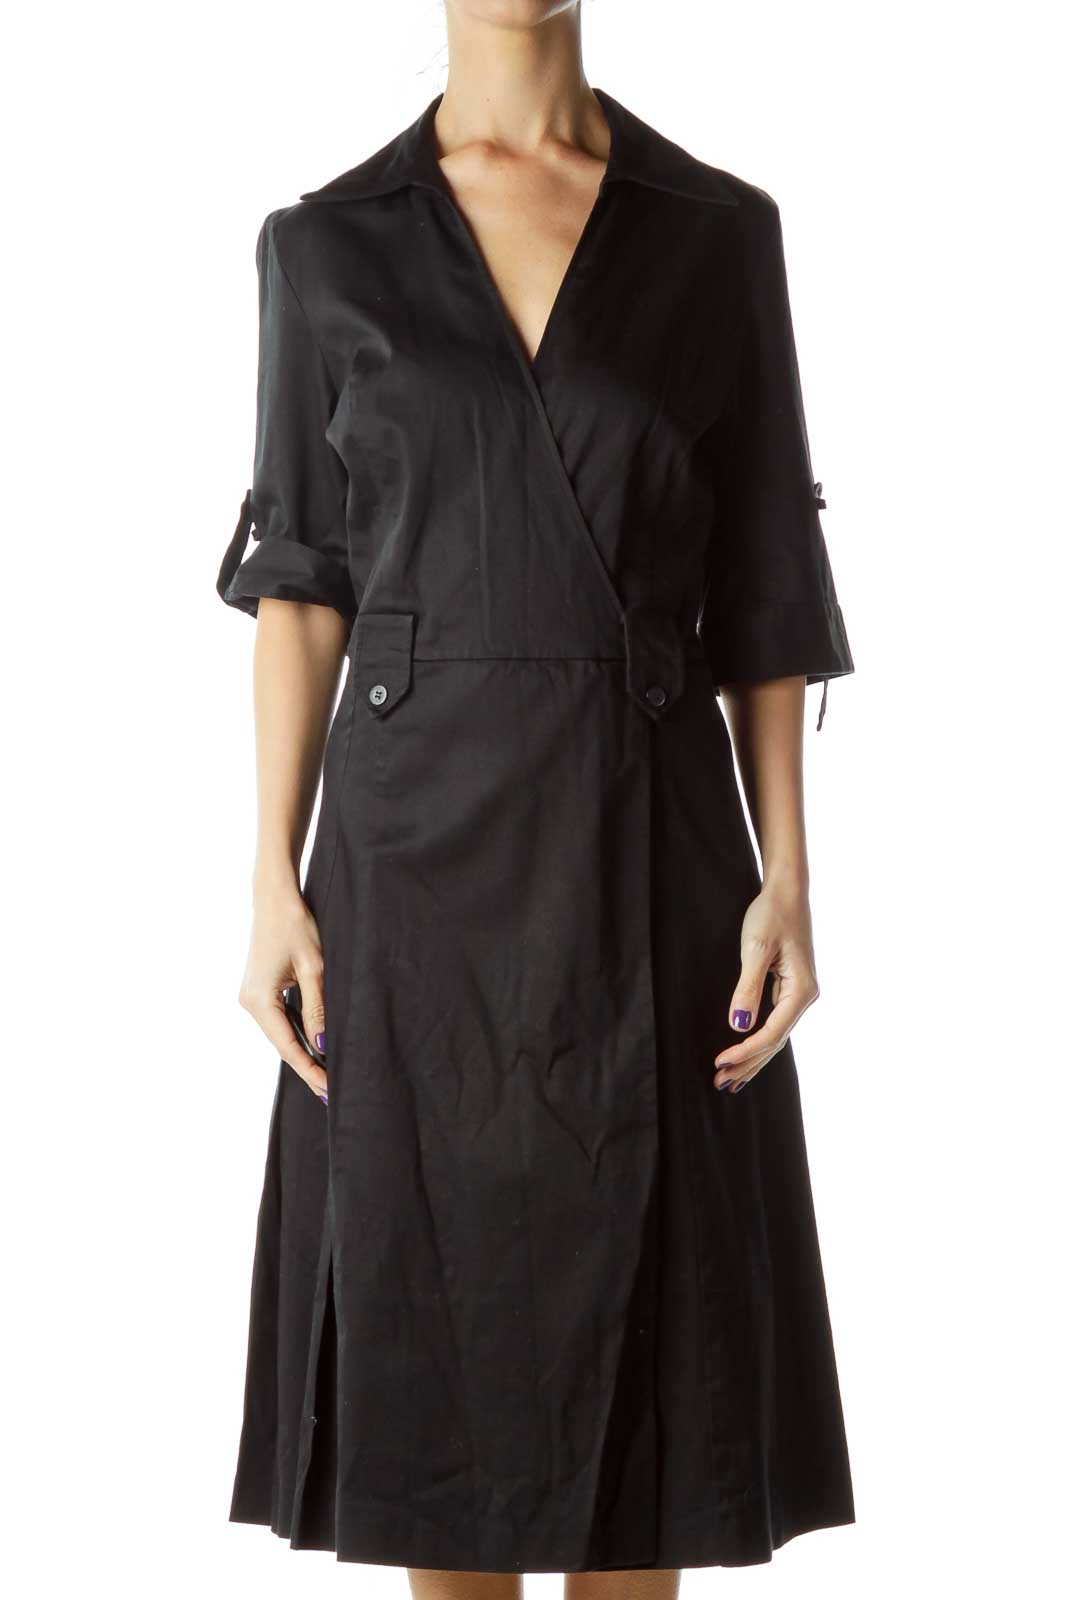 Black Pleated Collared Shirt Dress Front